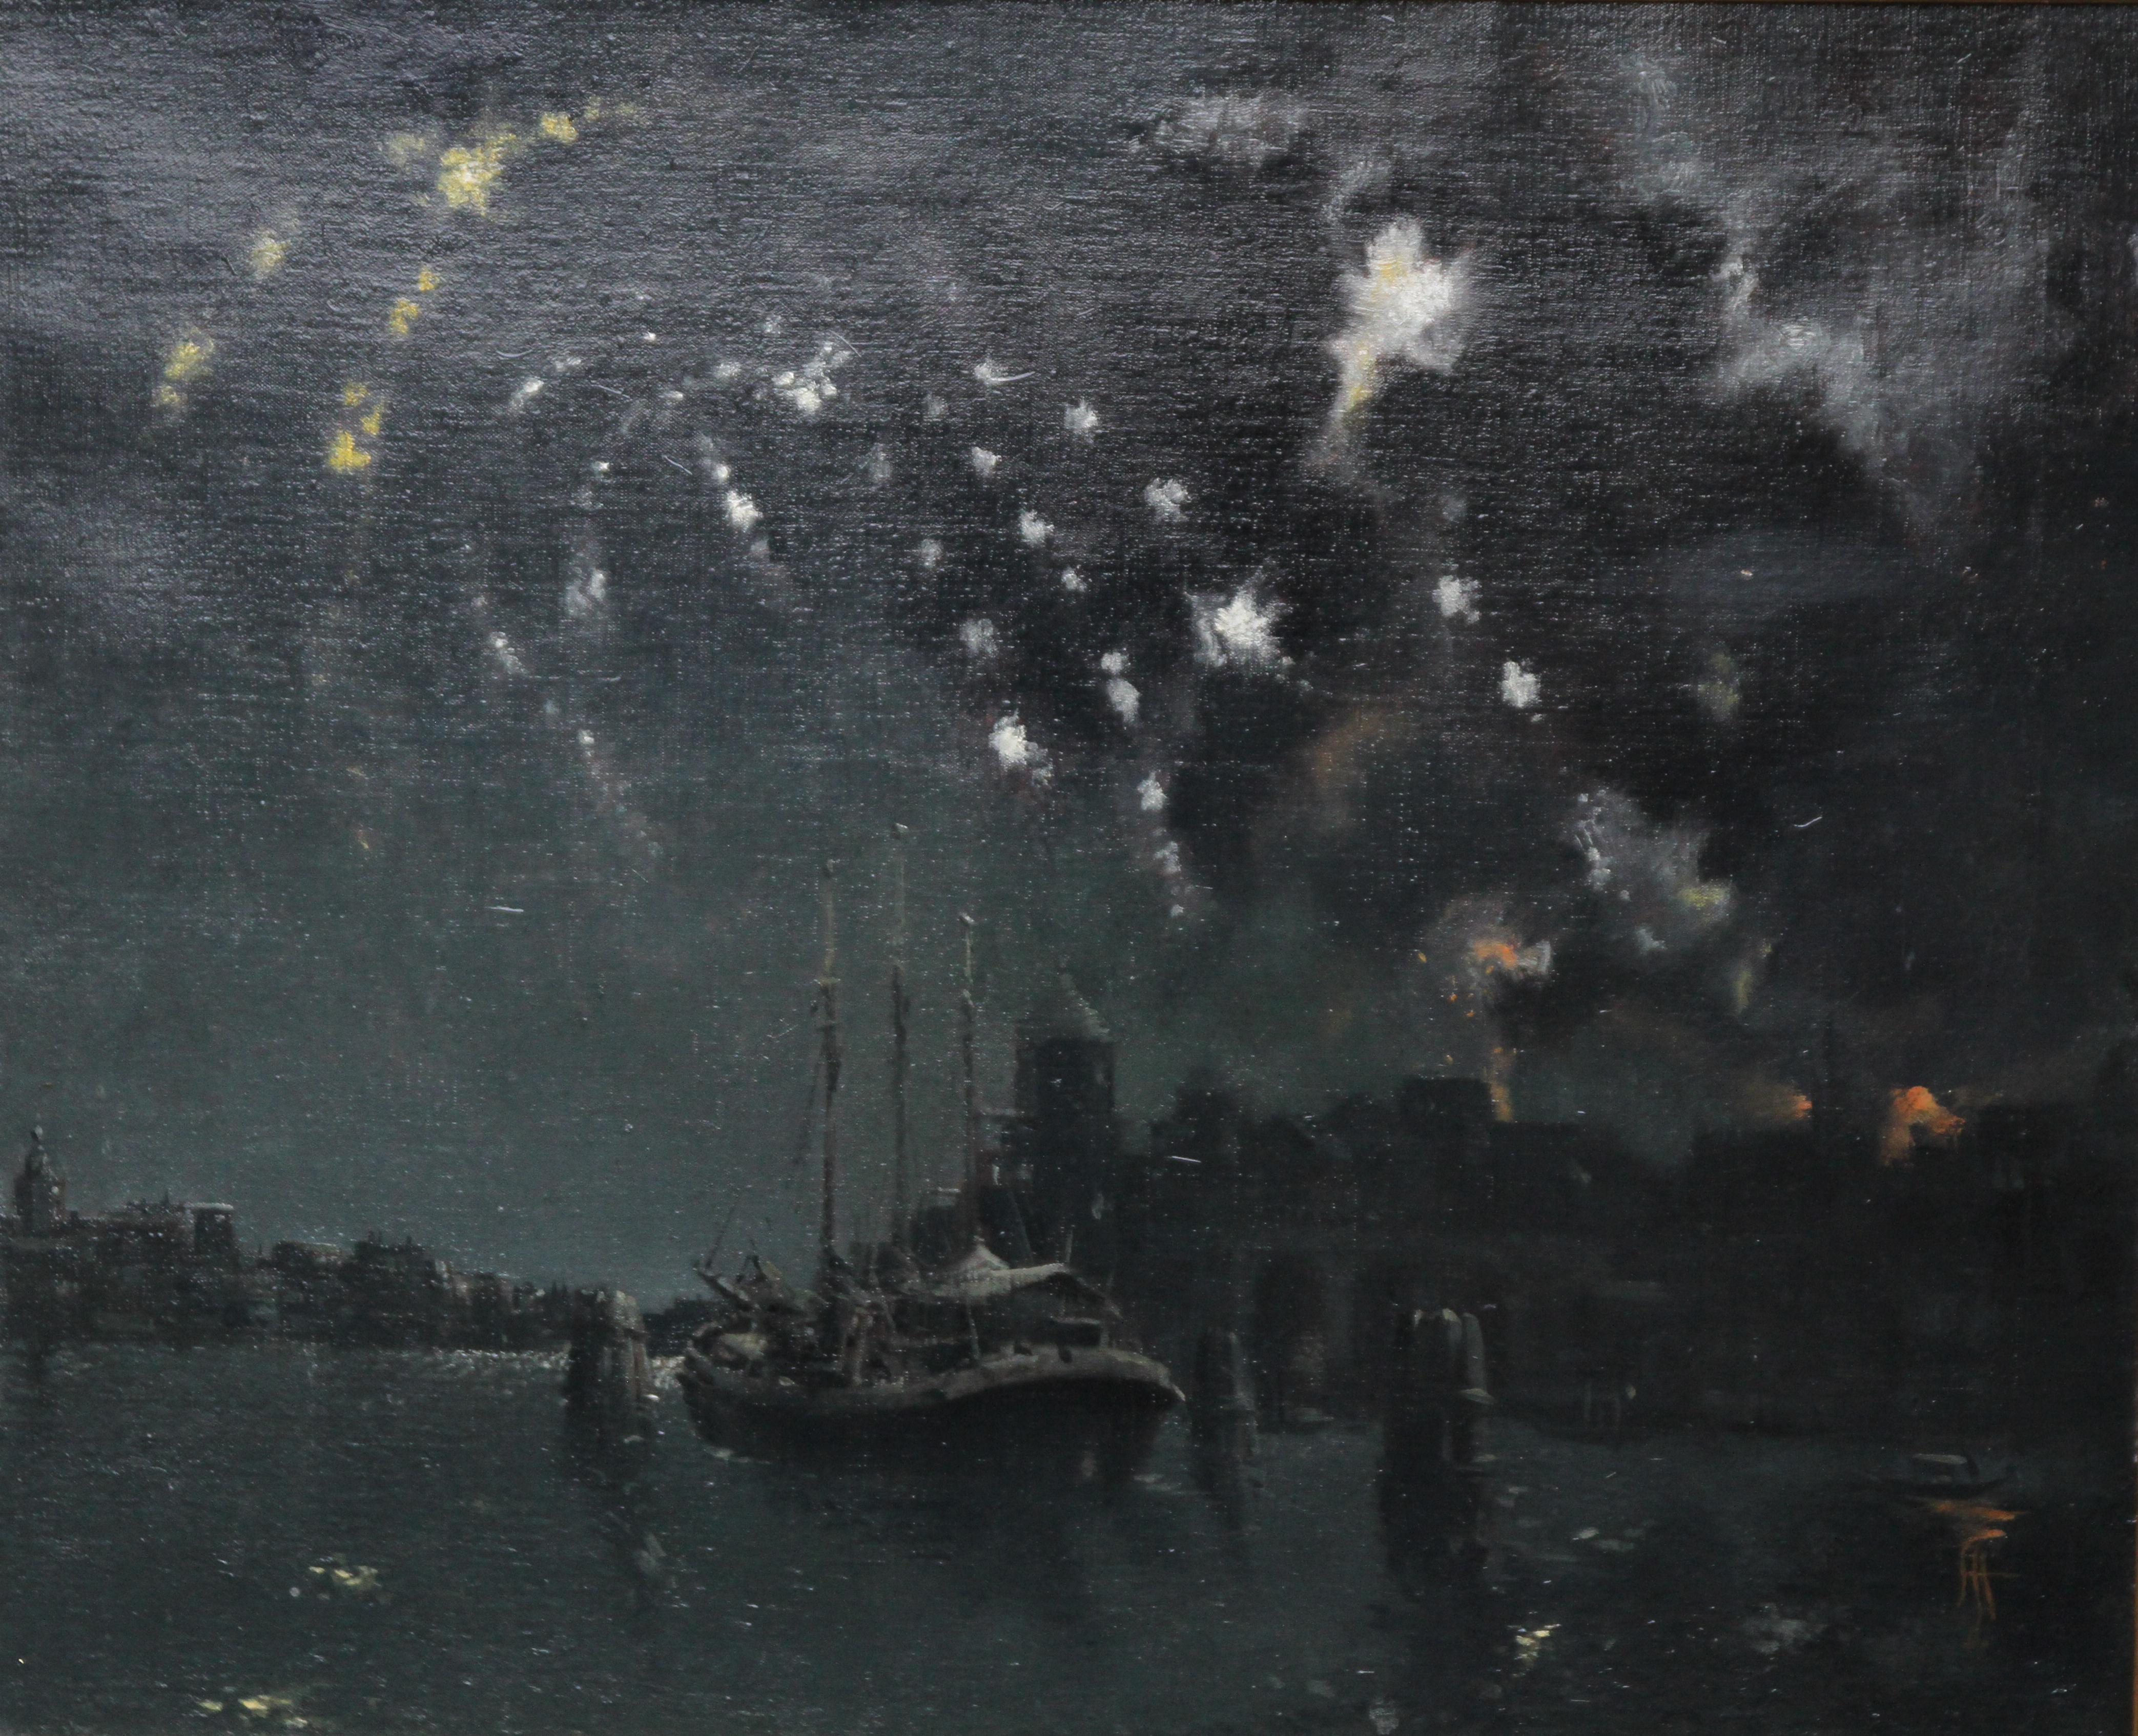 Fireworks on the Thames, London - British art river night landscape oil painting For Sale 3